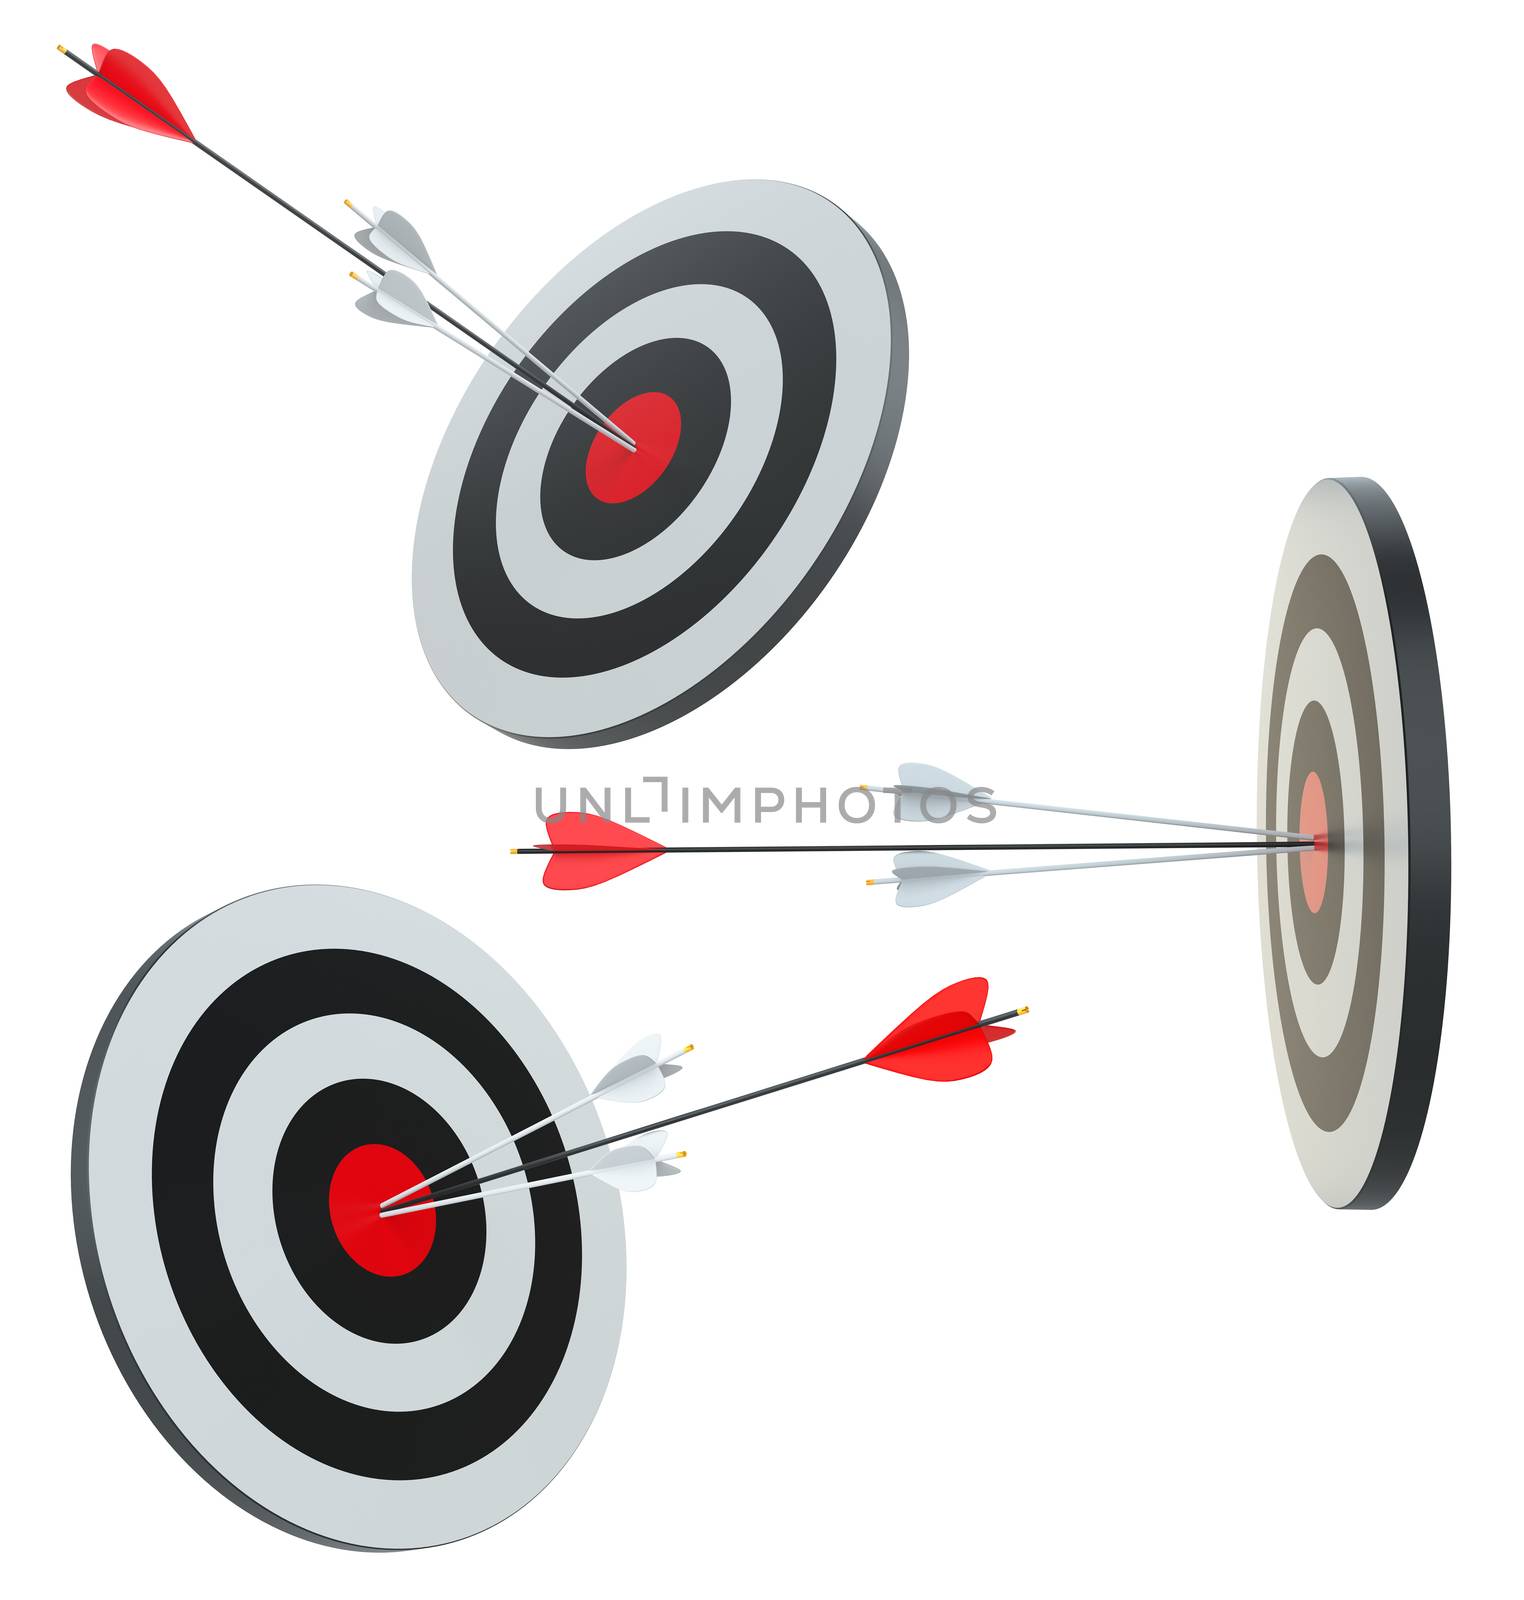 Target hit in the center by arrows by cherezoff